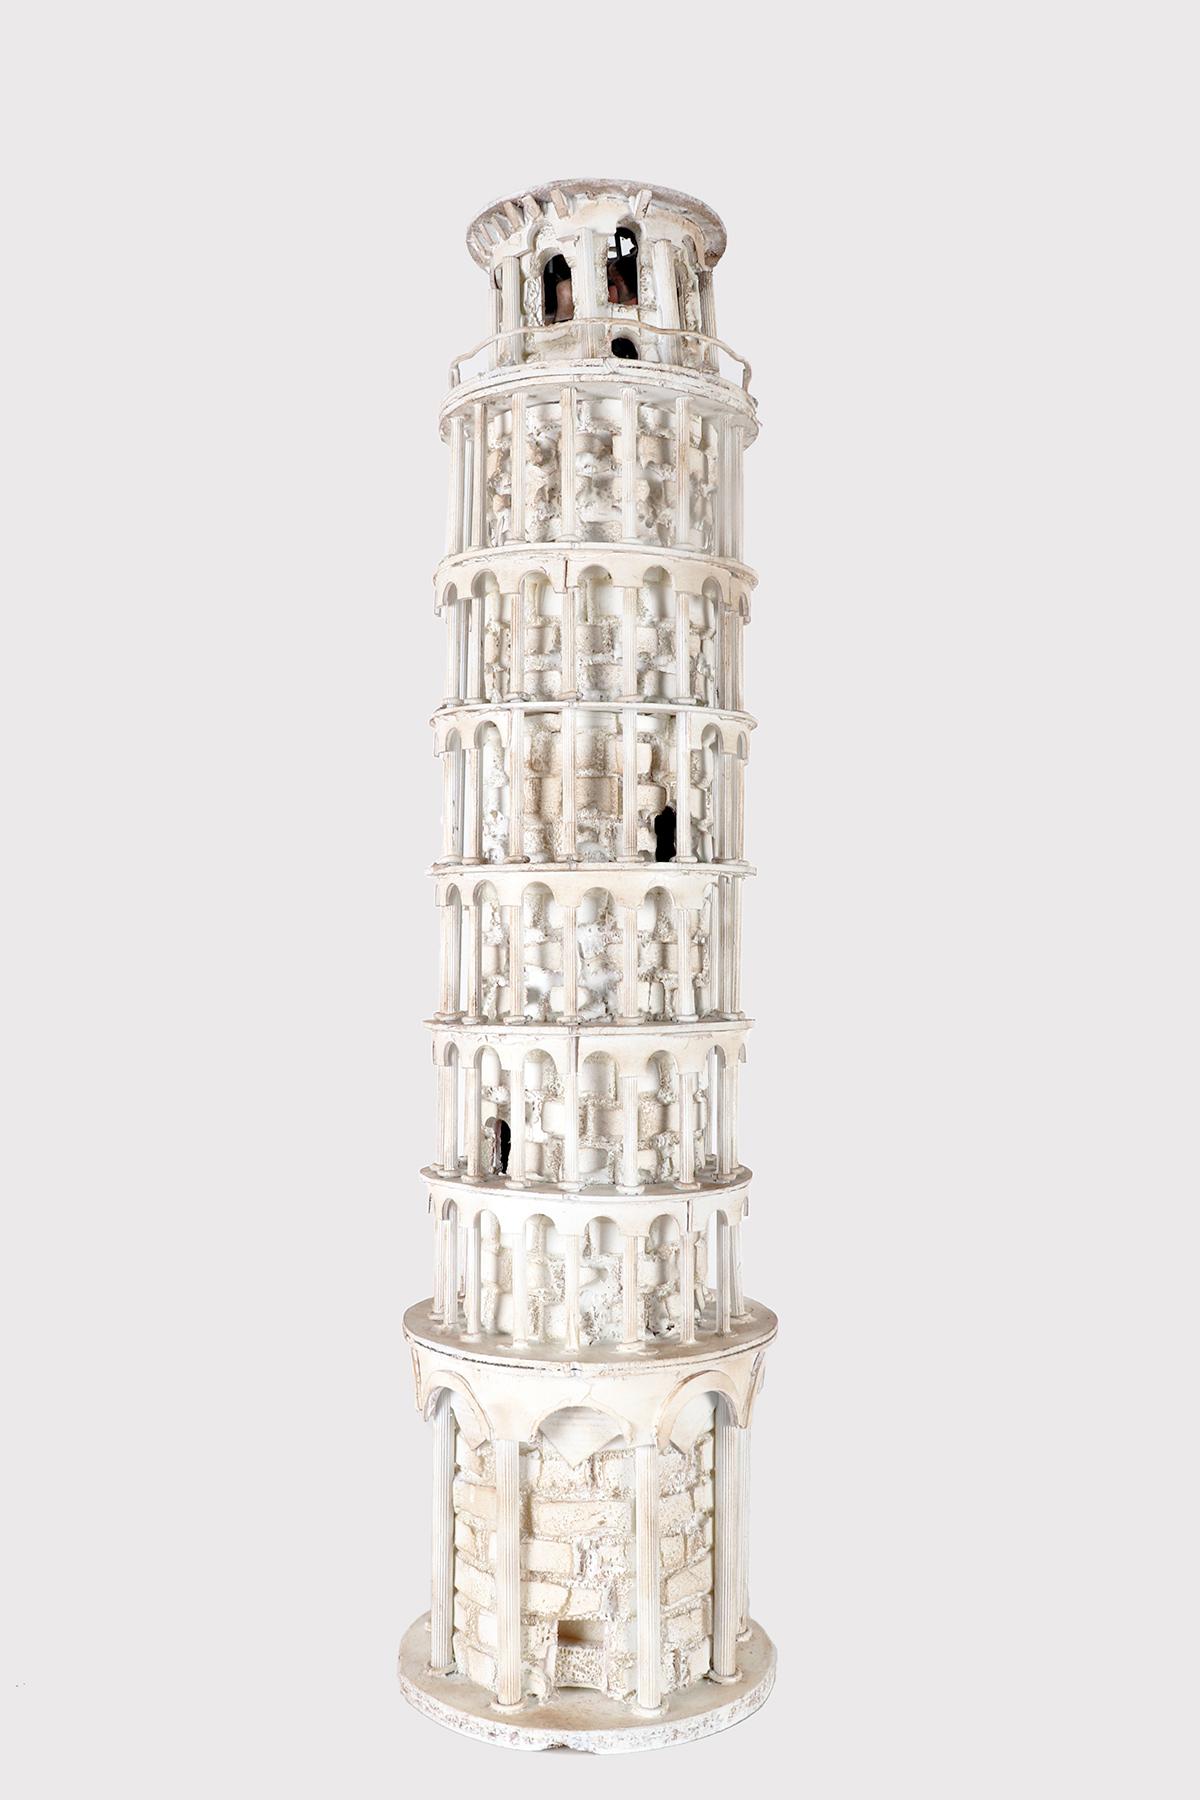 Miniature Wunderkammer Grand Tour architectural model, entirely handmade, in painted wood white color and polystyrene, depicting the Tower of Pisa. The bells made of brass are inserted in the final part of the tower. Original patina. Italy circa